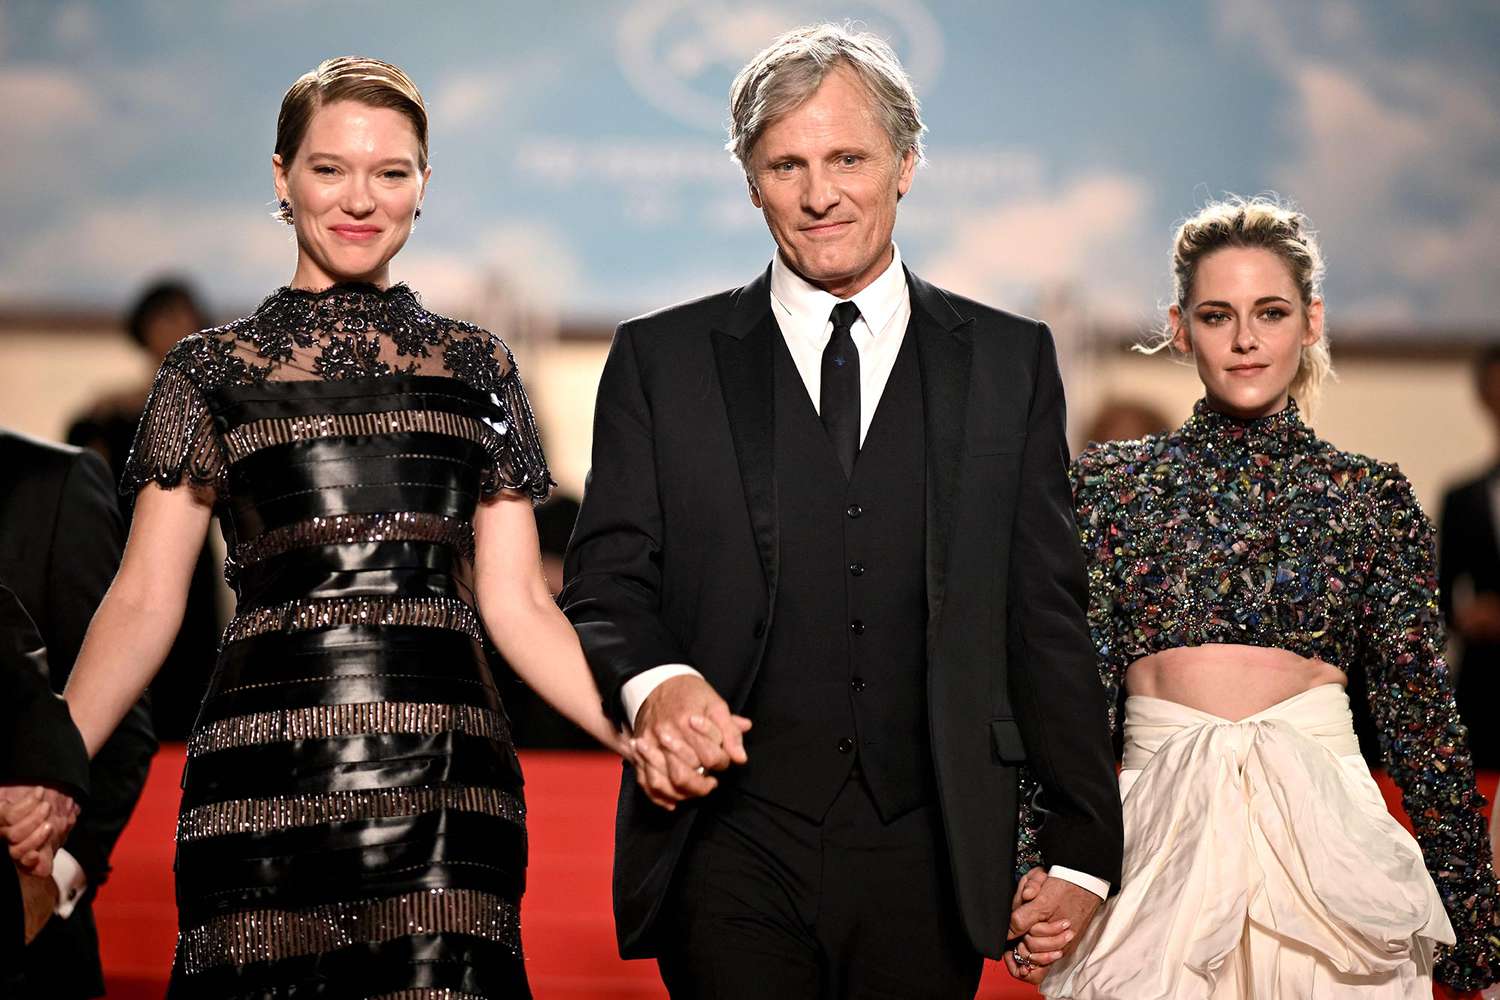 Cannes Film Festival 2022 Lea Seydoux, US actor Viggo Mortensen and US actress Kristen Stewart leave the Festival Palace after the screening of the film "Crimes Of the Future" during the 75th edition of the Cannes Film Festival in Cannes, southern France, on May 23, 2022.